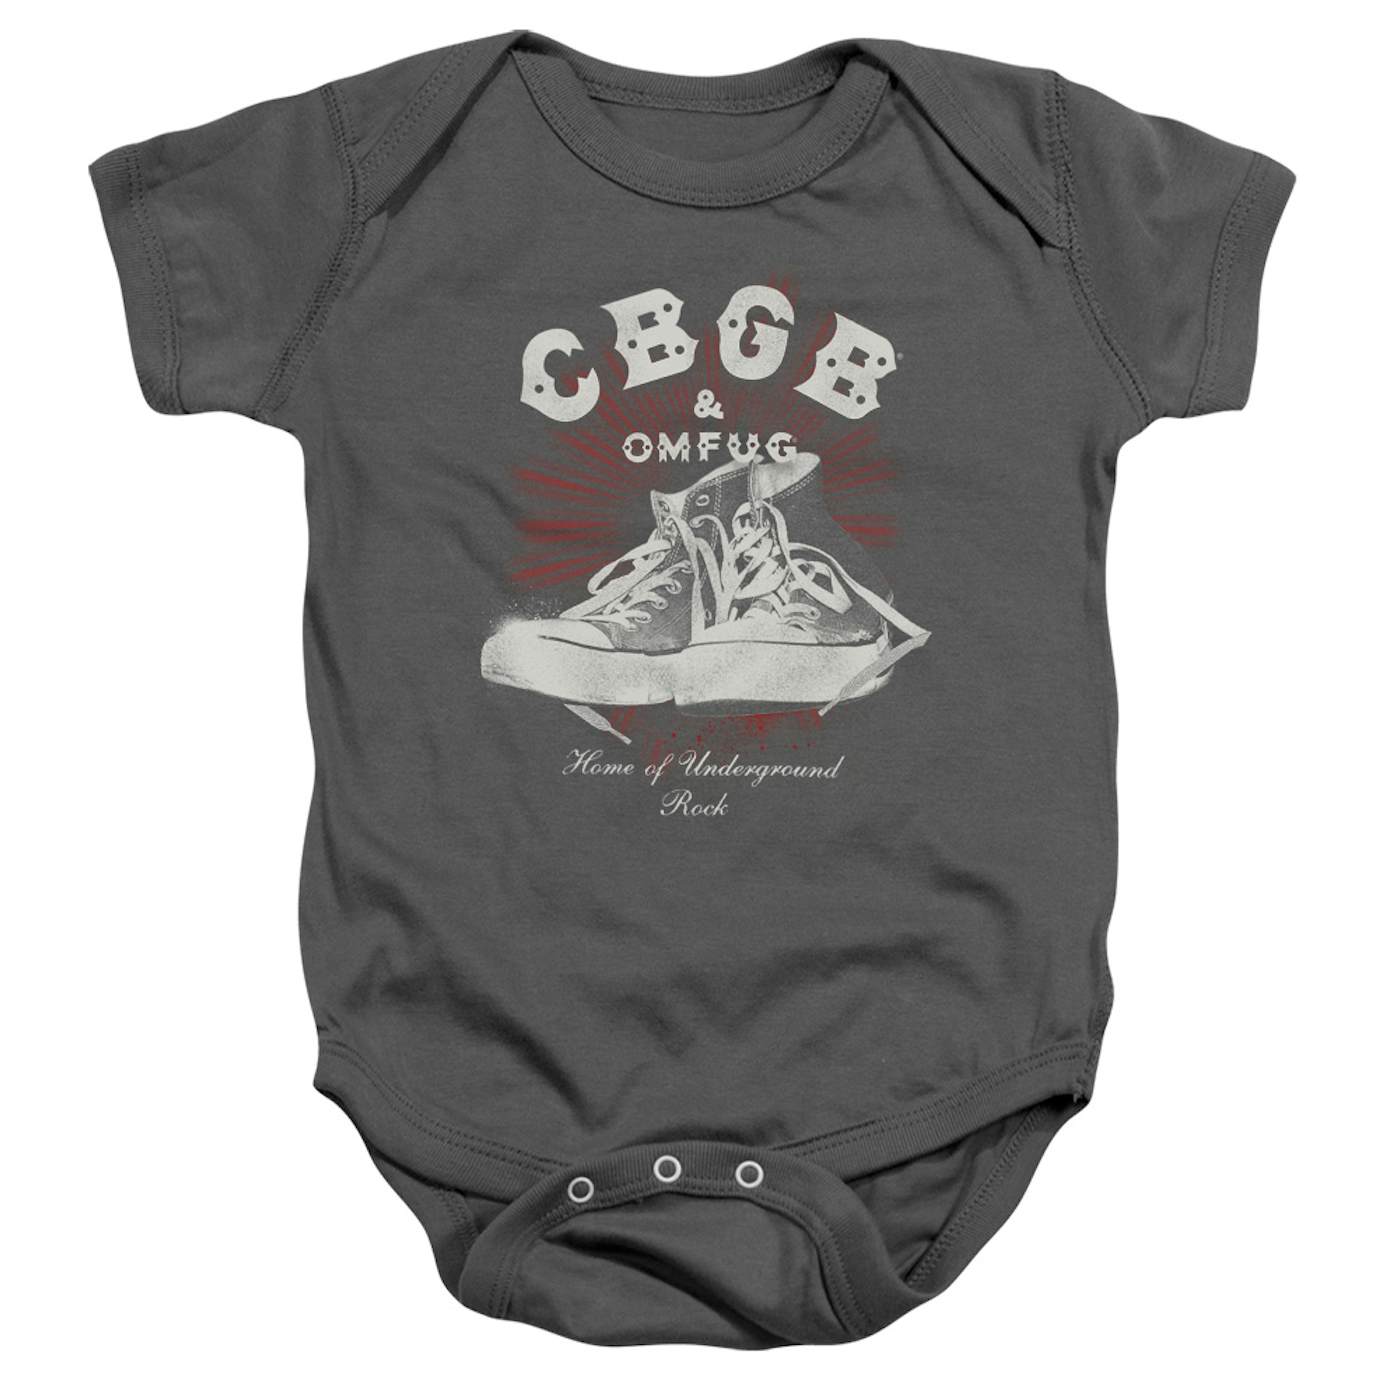 Cbgb Baby Onesie | HIGH TOPS Infant Snapsuit